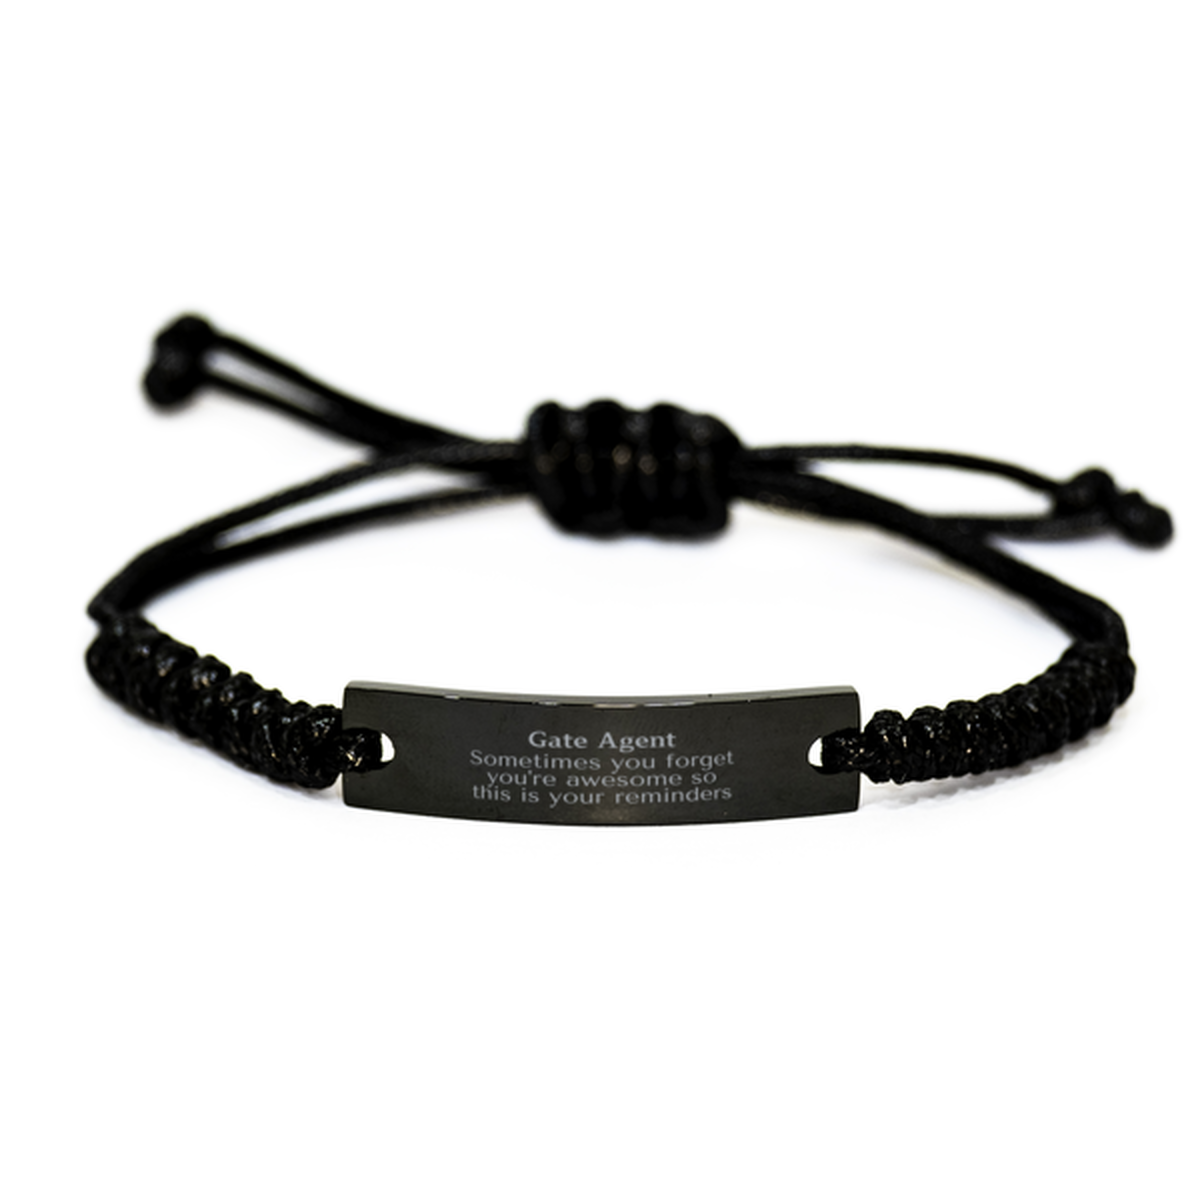 Sentimental Gate Agent Black Rope Bracelet, Gate Agent Sometimes you forget you're awesome so this is your reminders, Graduation Christmas Birthday Gifts for Gate Agent, Men, Women, Coworkers